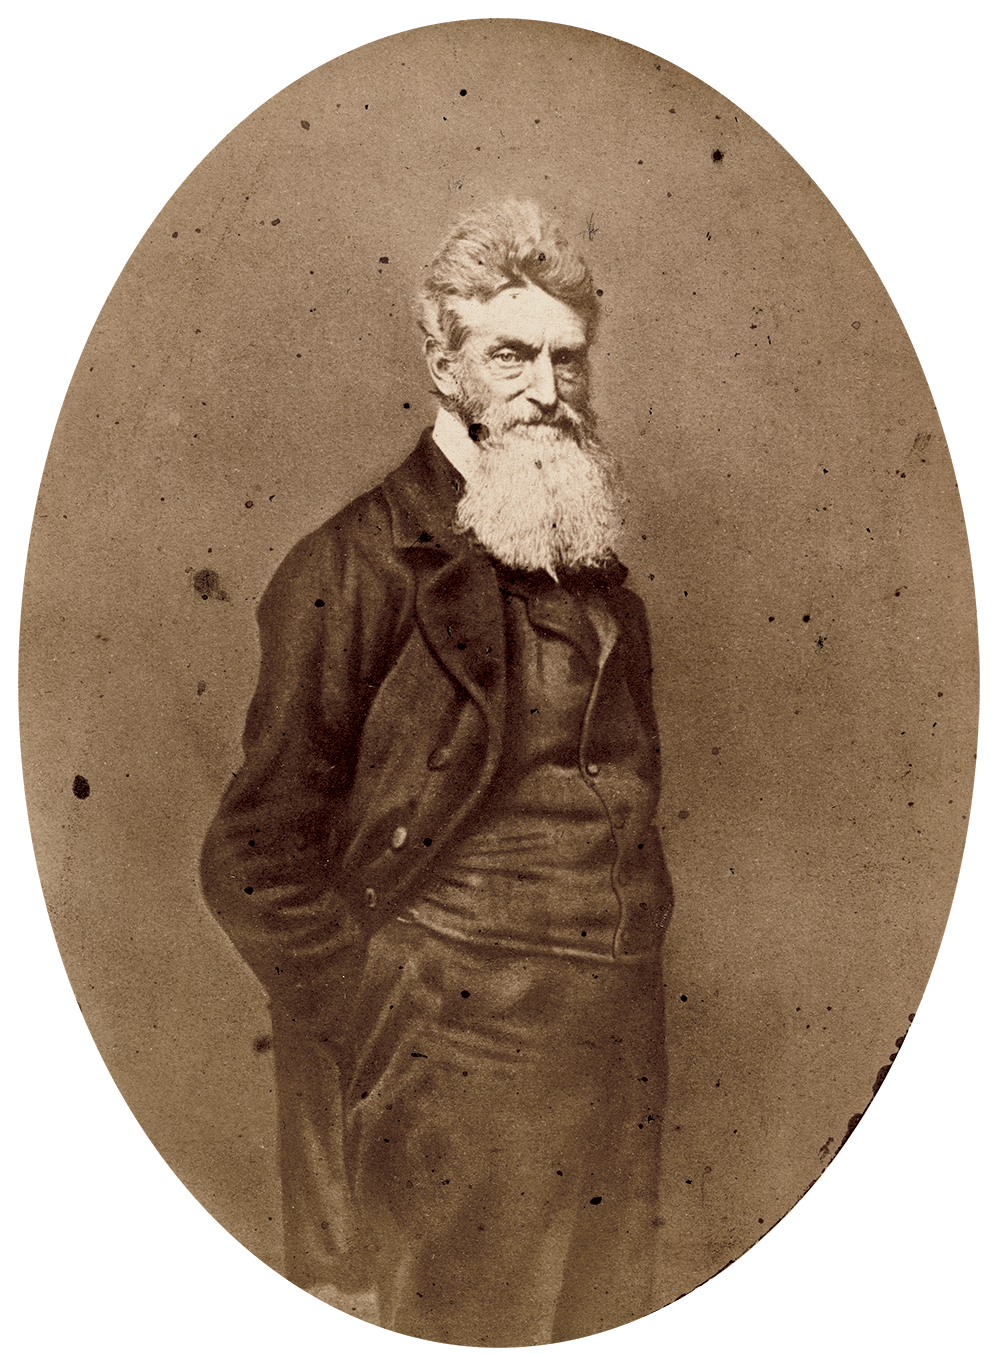 John Brown. Albumen print by Martin M. Lawrence of New York City. National Portrait Gallery.